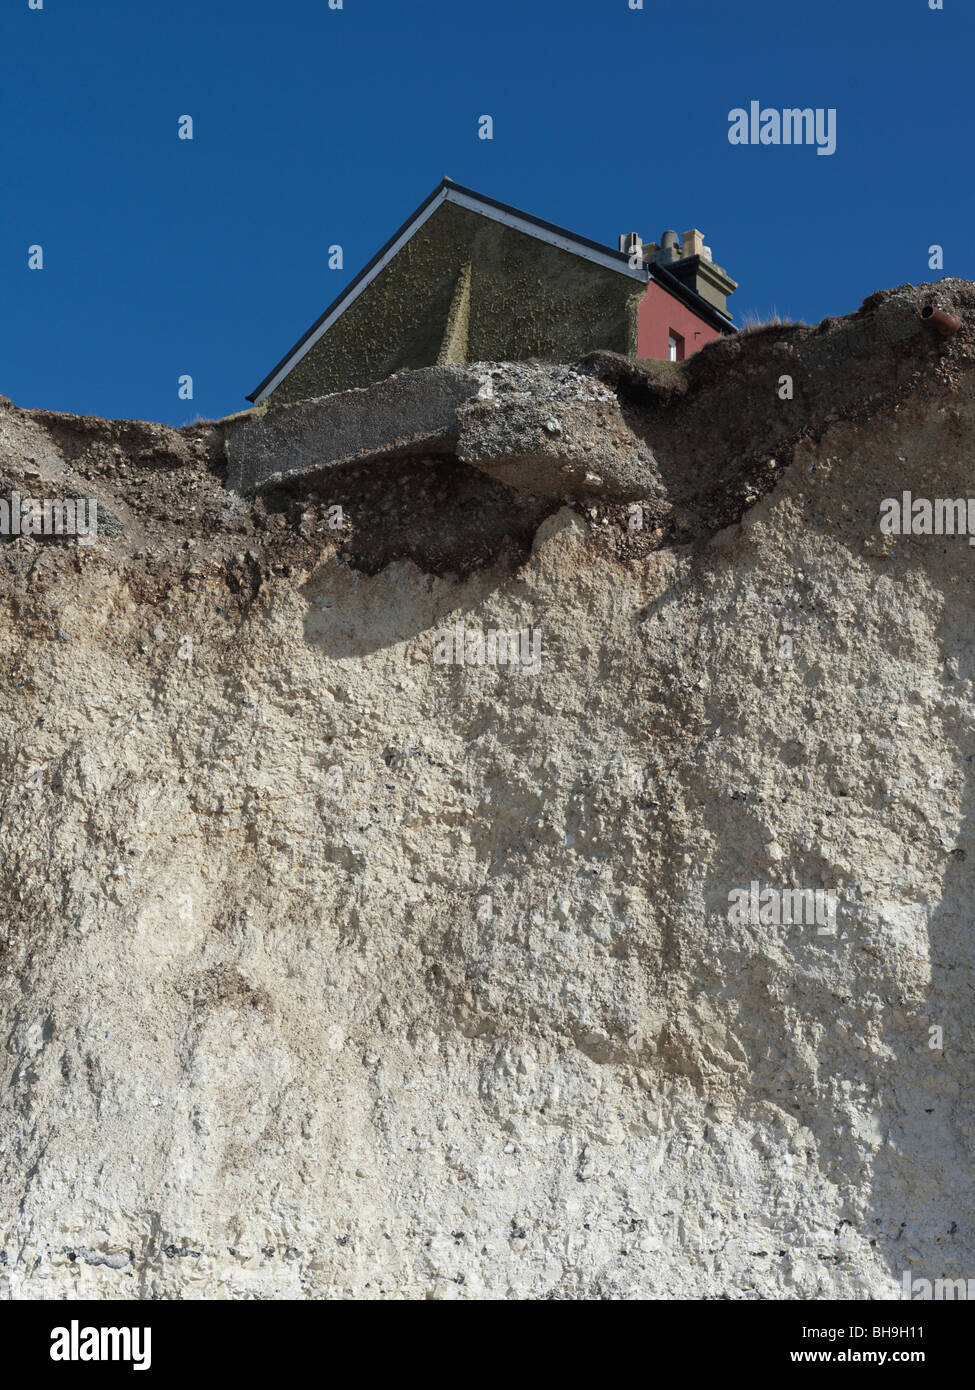 house on cliff edge due to erosion by sea. Stock Photo